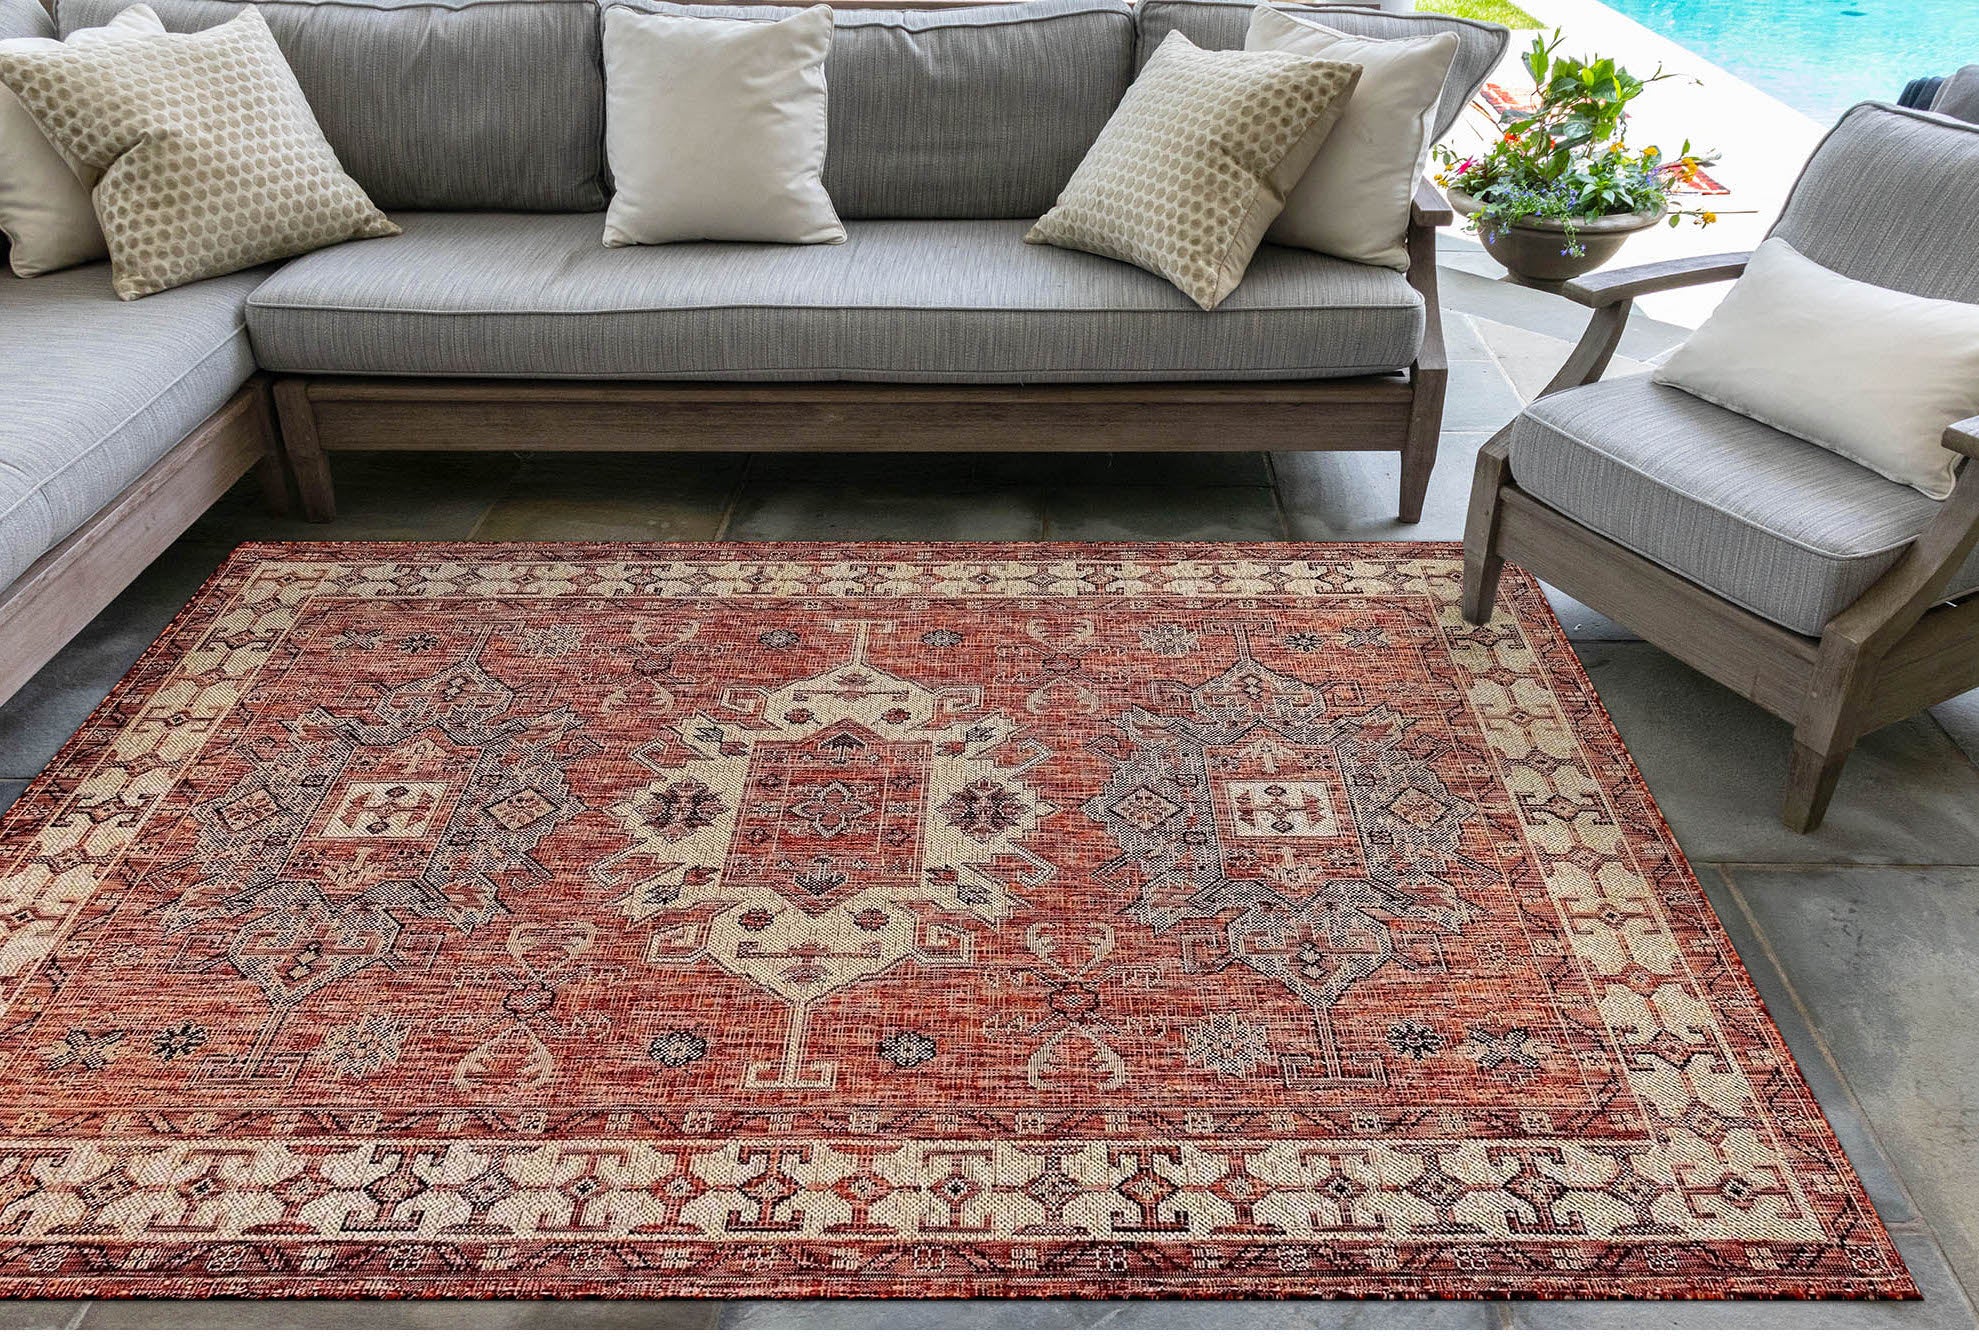 Caring for your Outdoor Rug